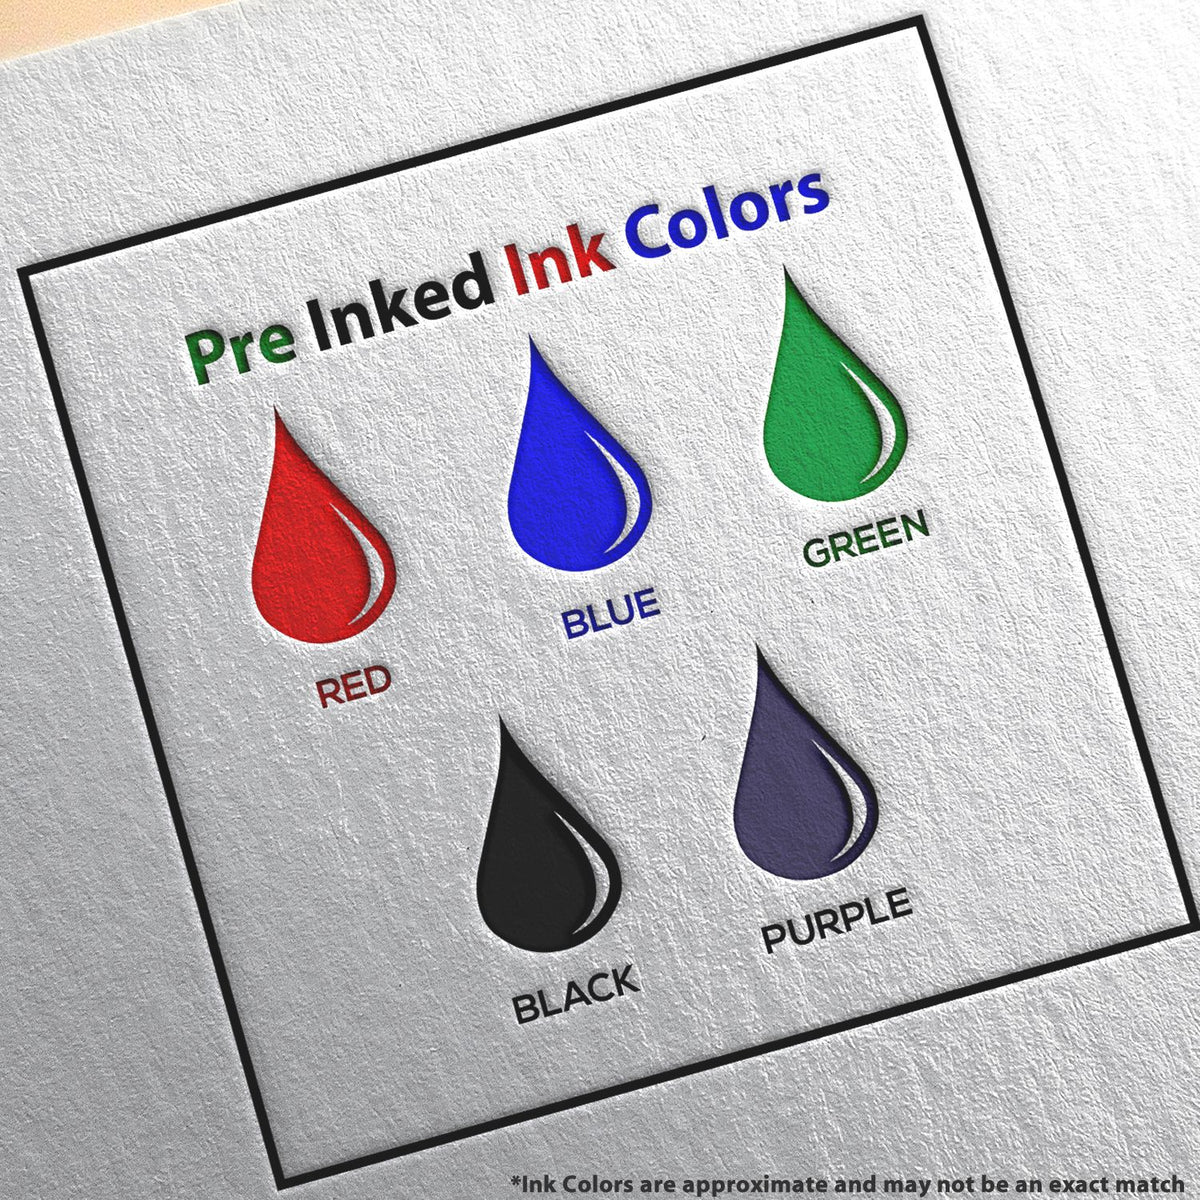 A picture showing the different ink colors or hues available for the Slim Pre-Inked New Mexico Land Surveyor Seal Stamp product.